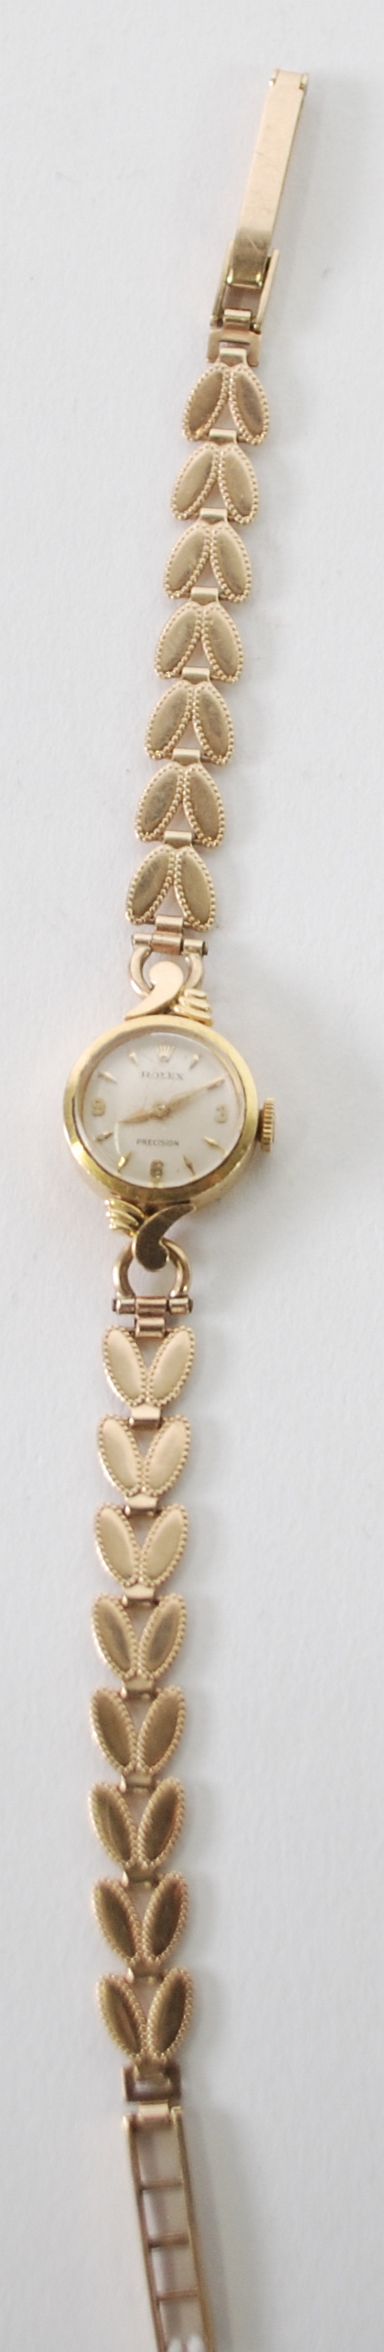 LADY'S ROLEX 'PRECISION' 18ct GOLD WRIST WATCH, with small circular silvered dial, mechanical - Image 2 of 2